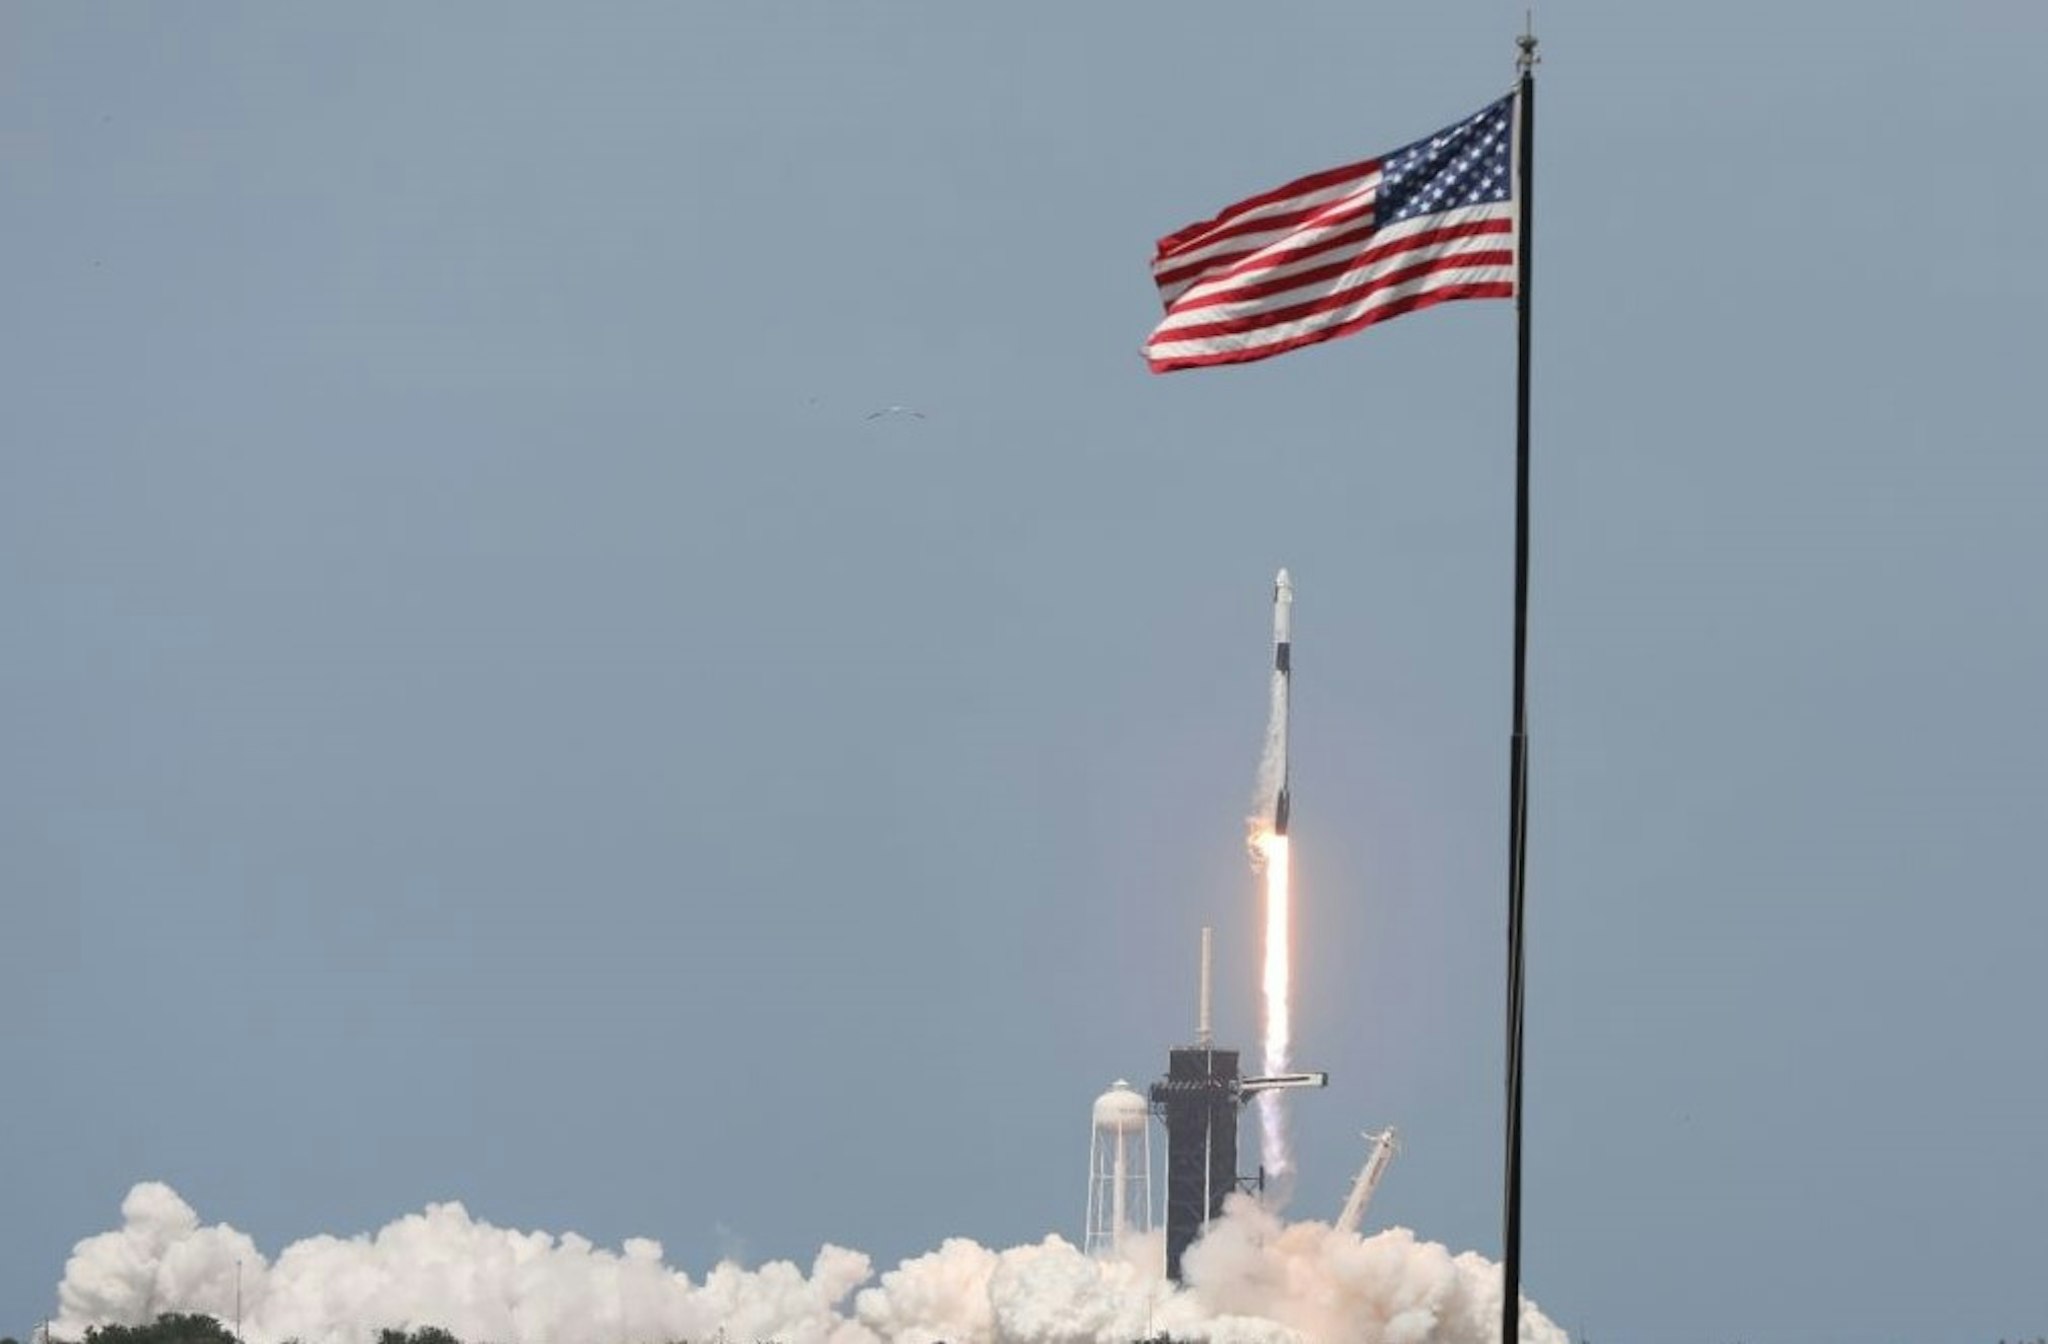 A SpaceX Falcon 9 rocket carrying the Crew Dragon spacecraft lifts off from launch complex 39A at the Kennedy Space Center in Florida on May 30, 2020. - NASA astronauts Hurley and Bob Behnken are set to depart for an extended stay at the International Space Station on the SpaceX Demo-2 mission. (Photo by Gregg Newton / AFP) (Photo by